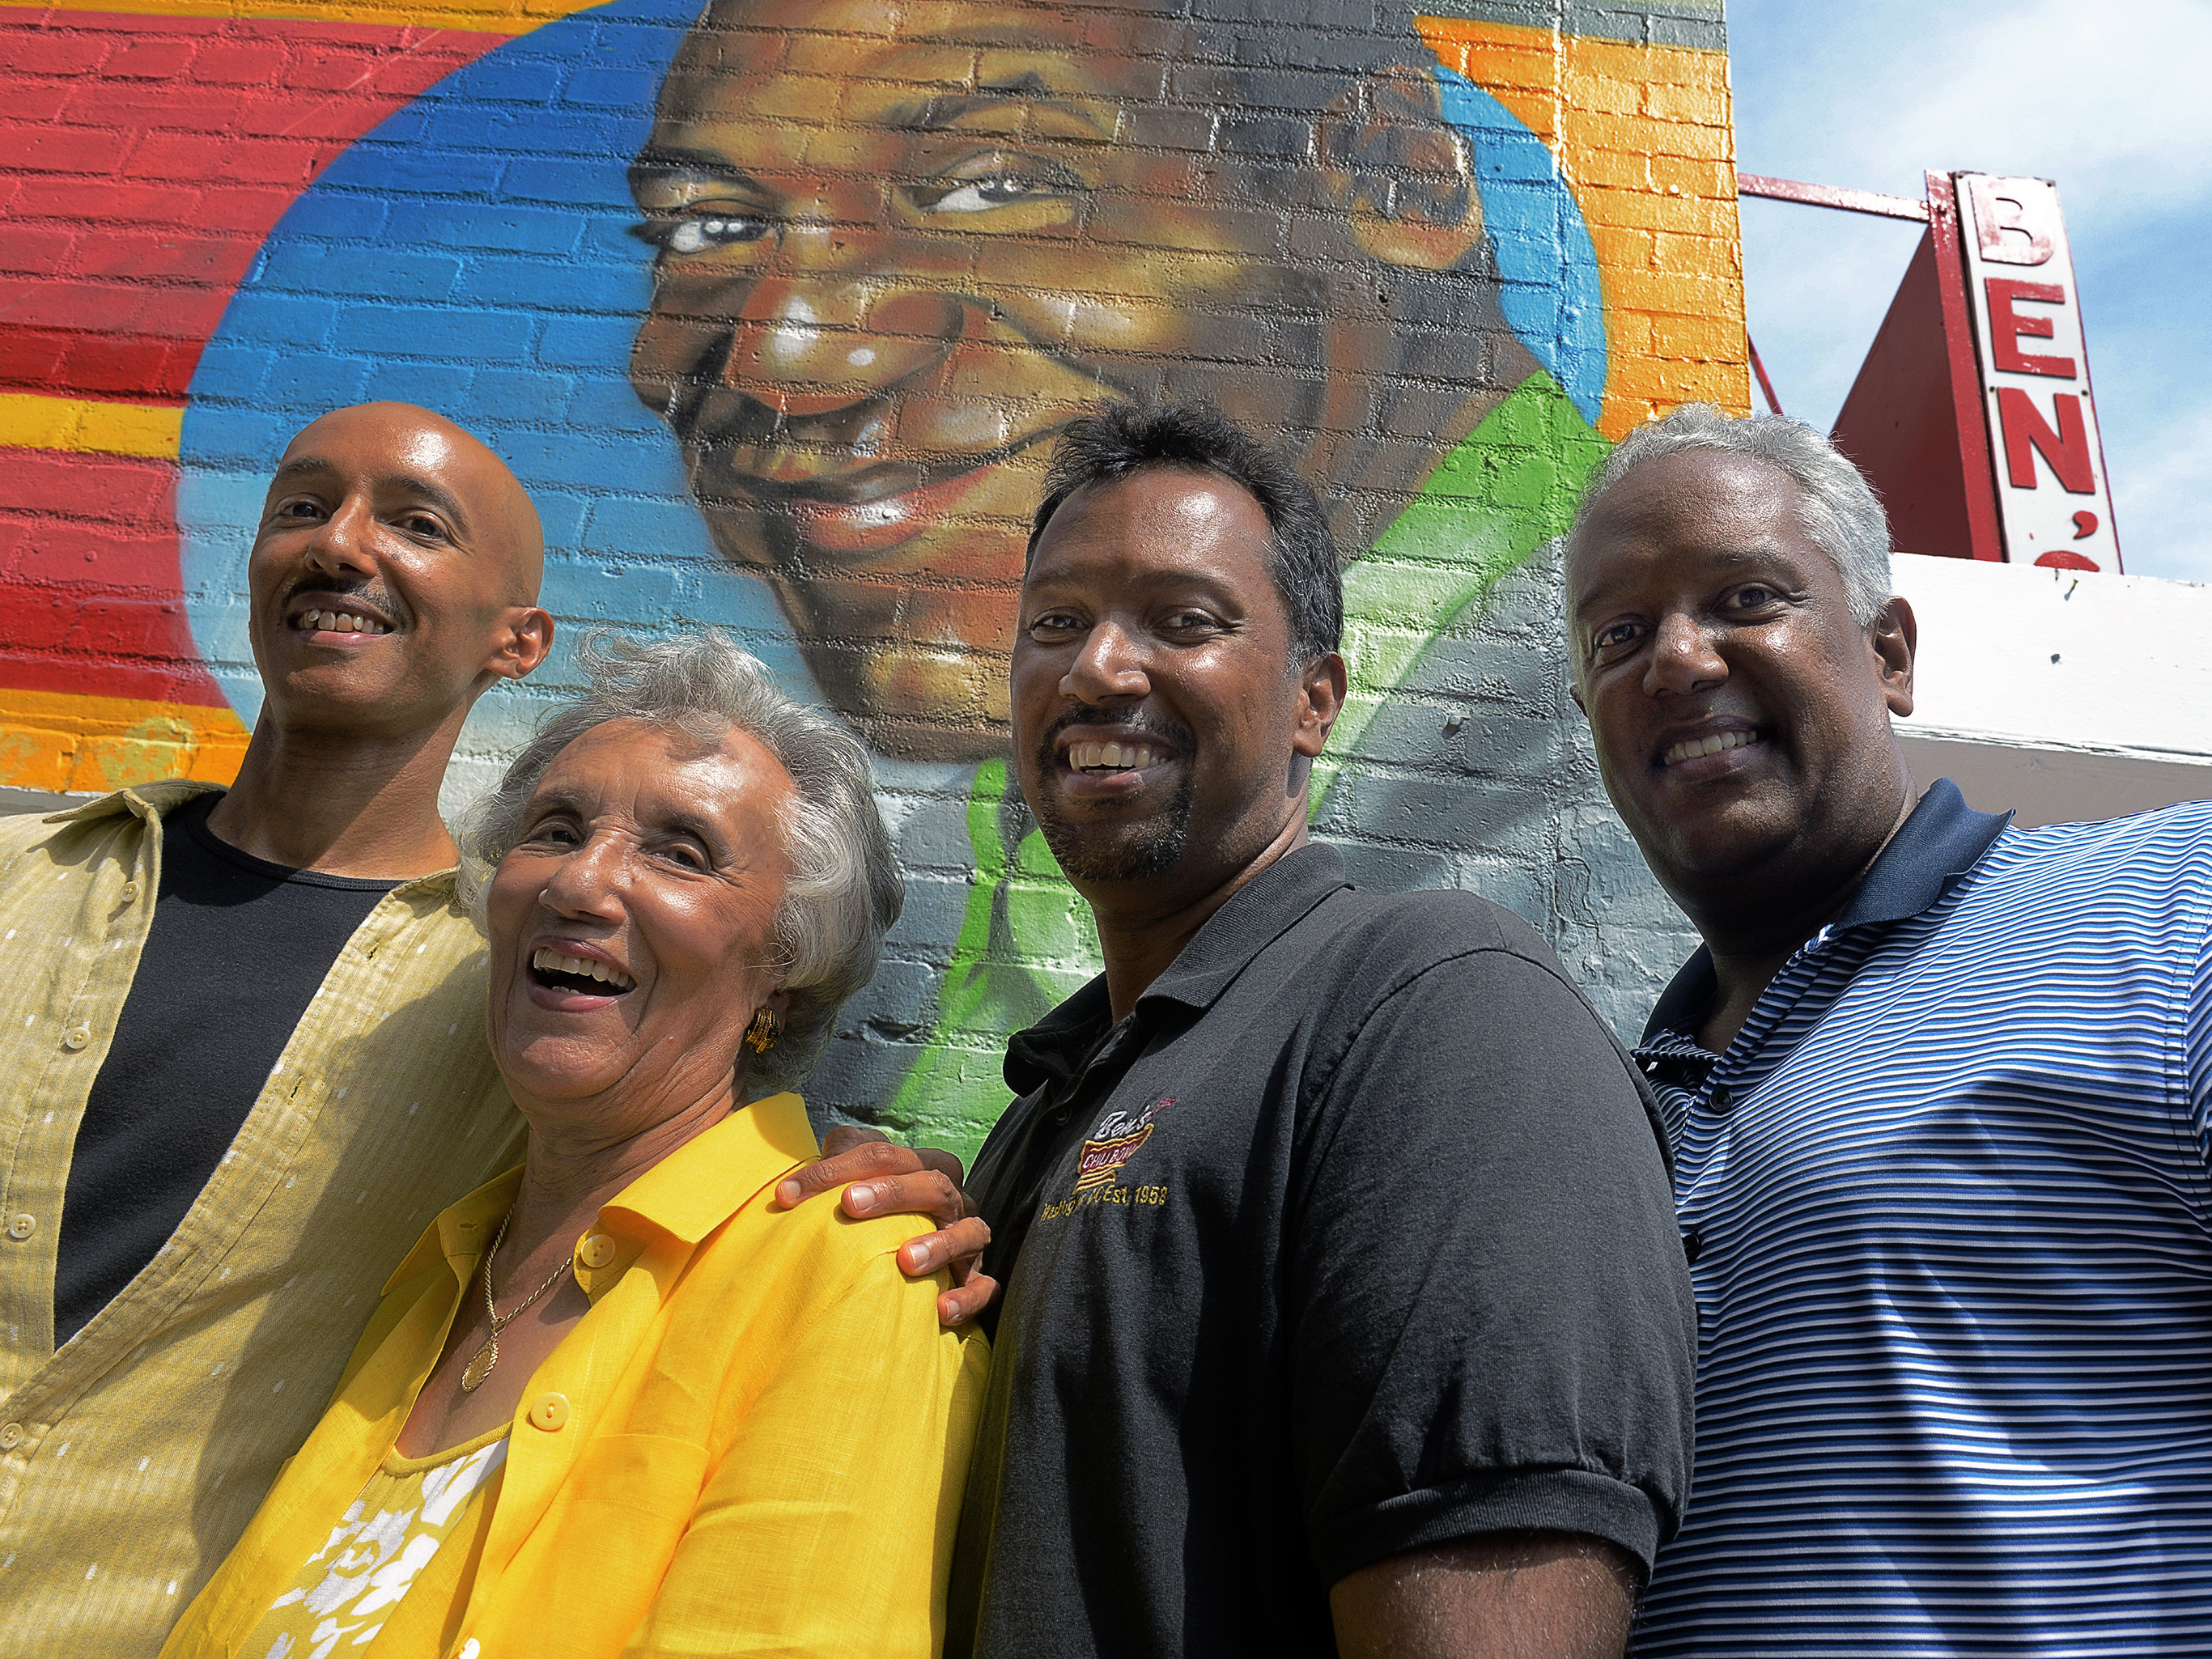 Virginia Ali, matriarch of the Ali family, of Ben's Chili Bowl, with her sons Sage (from left), Nizam and Kamal on the eve of their 55th-anniversary celebration, Aug. 21, 2013.